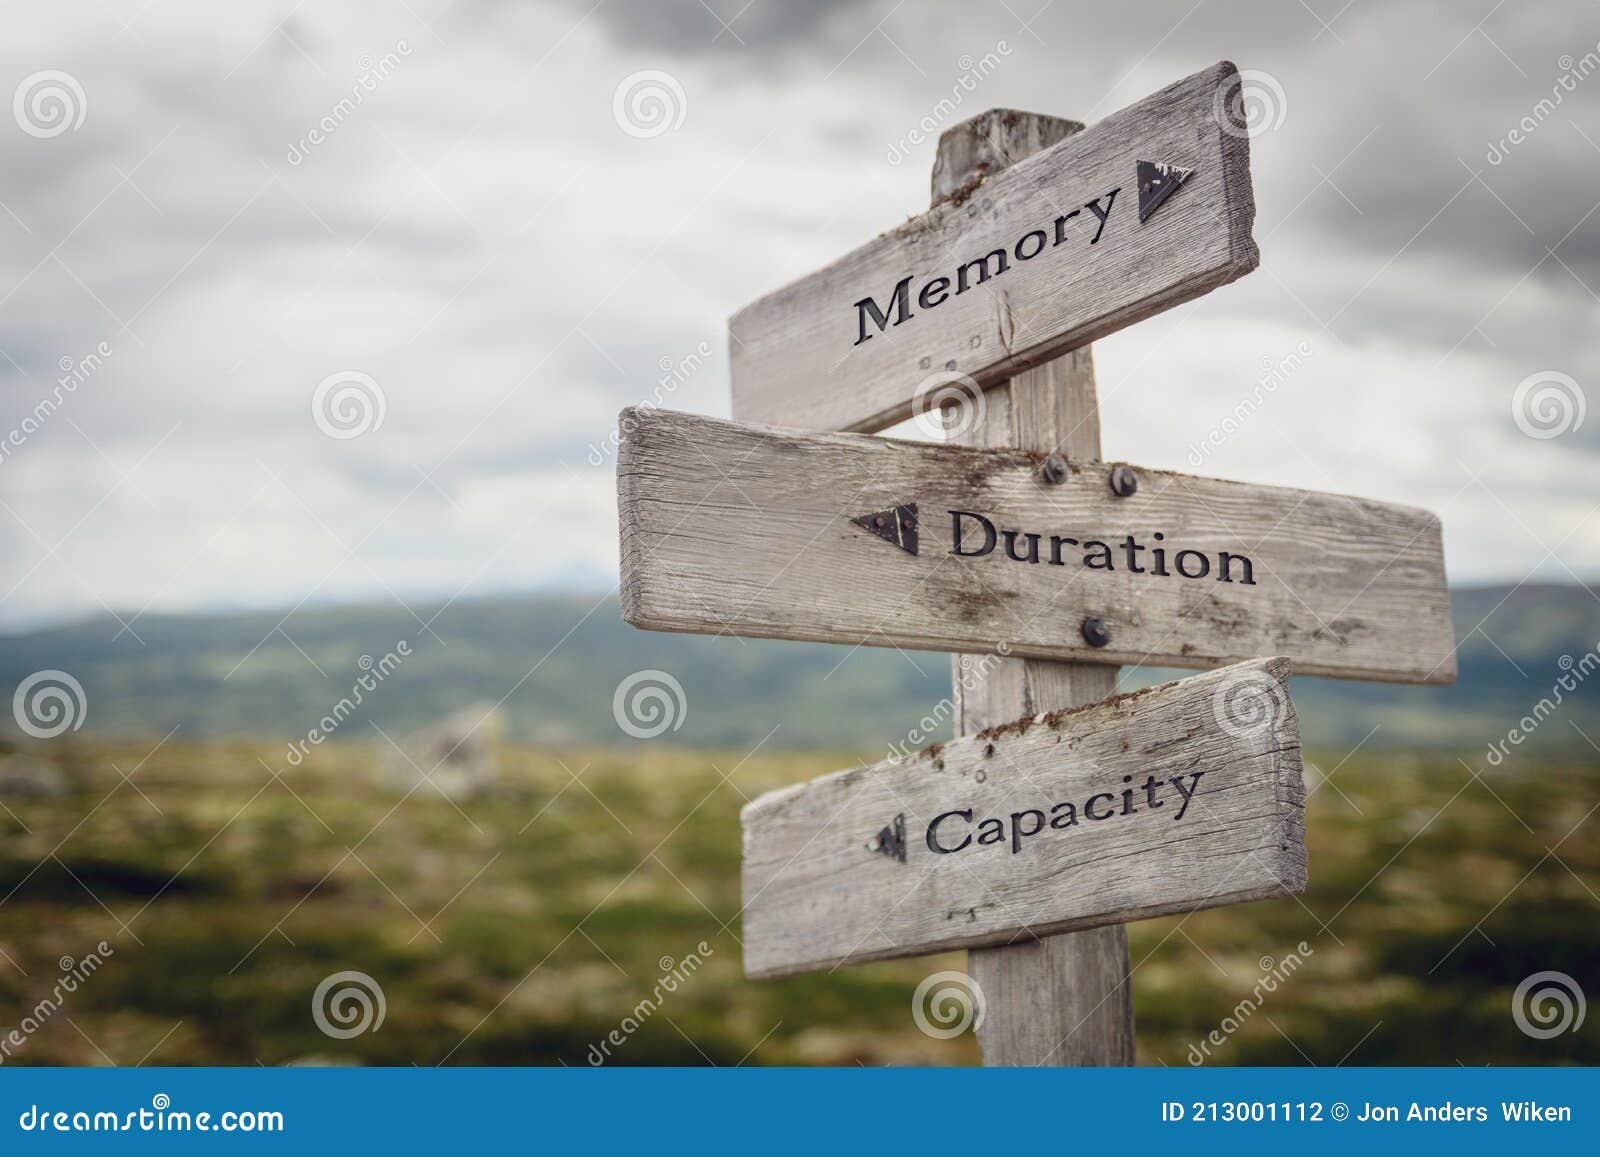 memory duration capacity signpost outdoors